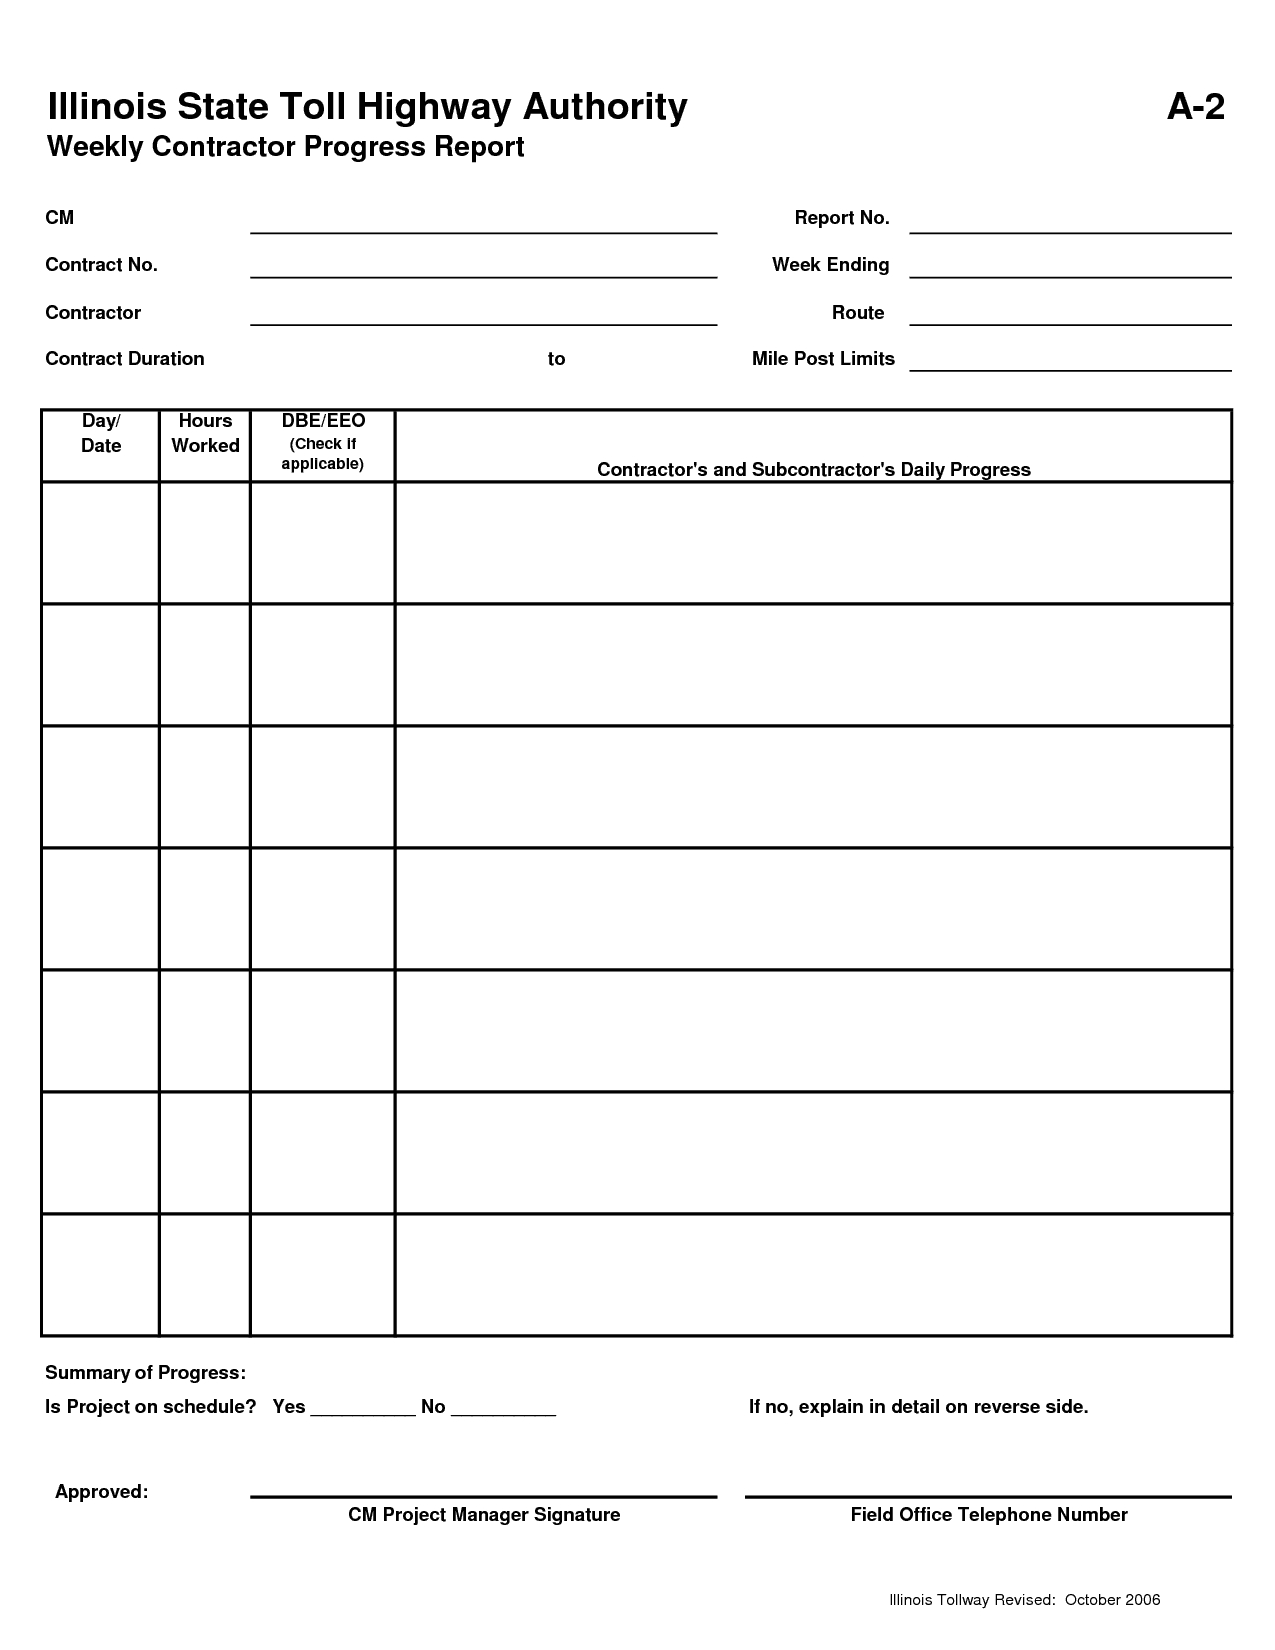 Bookkeeping Eadsheet For Small Business And Gas Station Intended For Sales Manager Monthly Report Templates